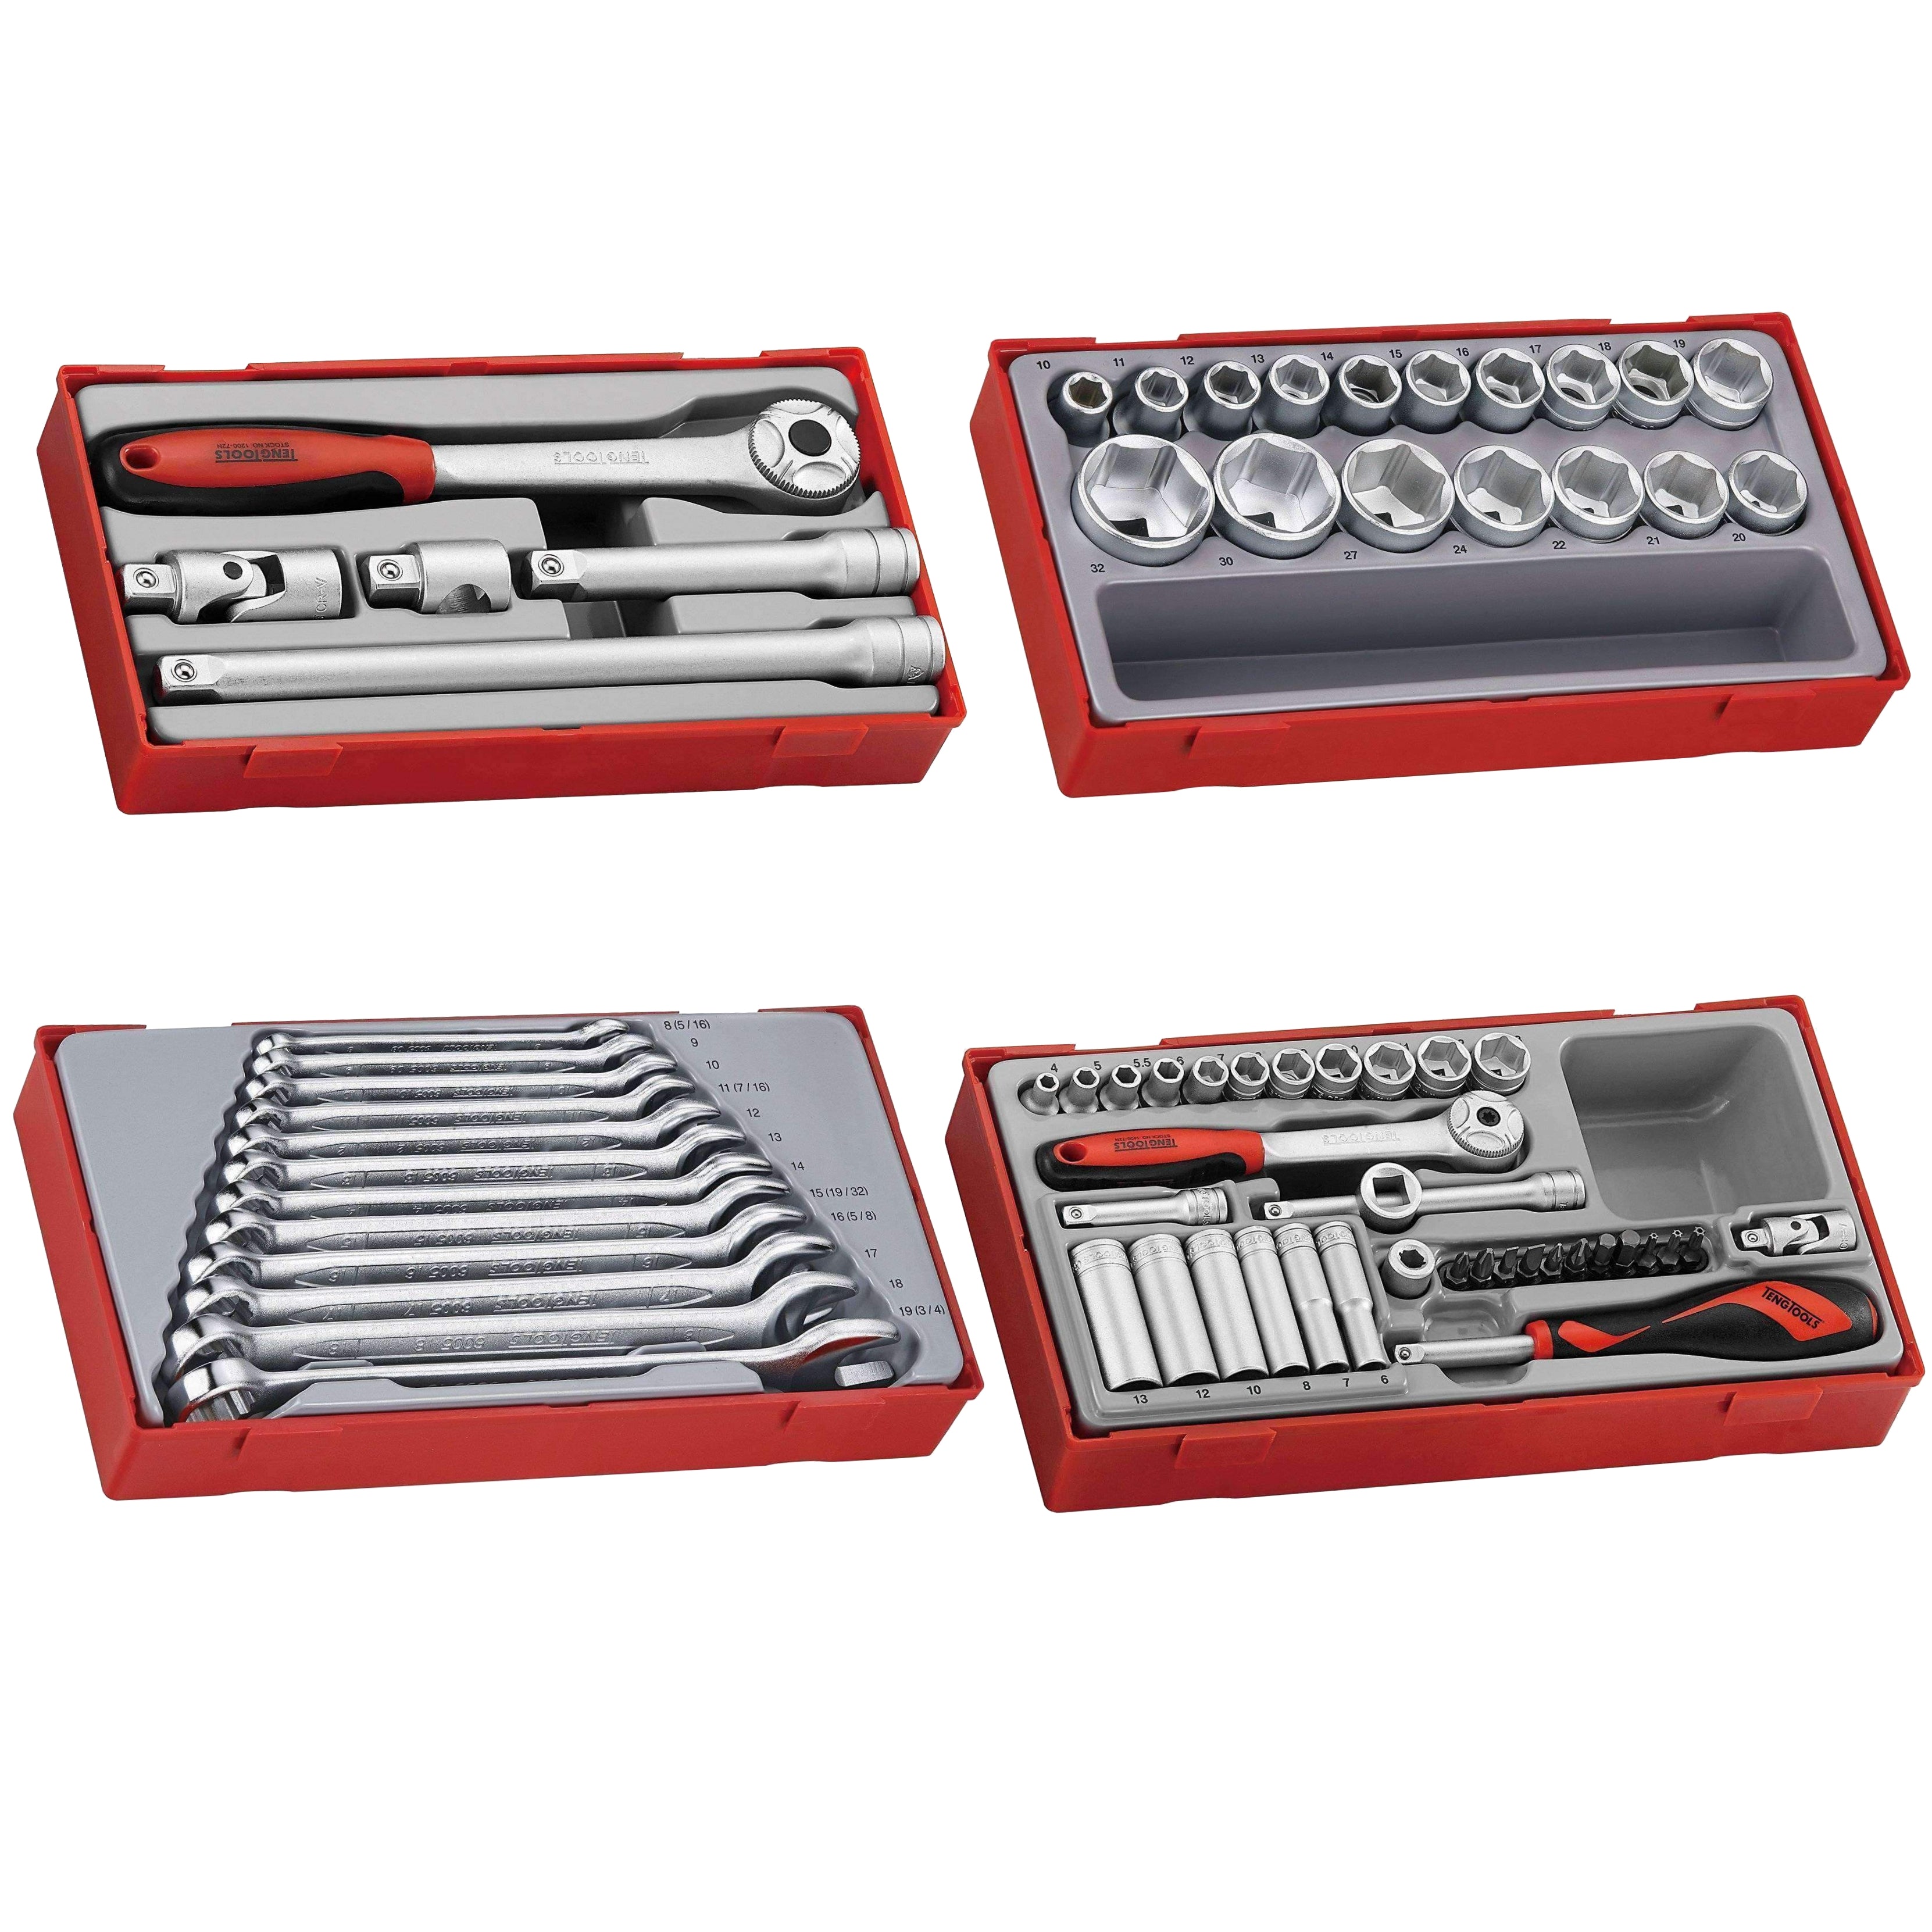 Teng Tools 173 Piece Complete Mixed Service Tool Kit